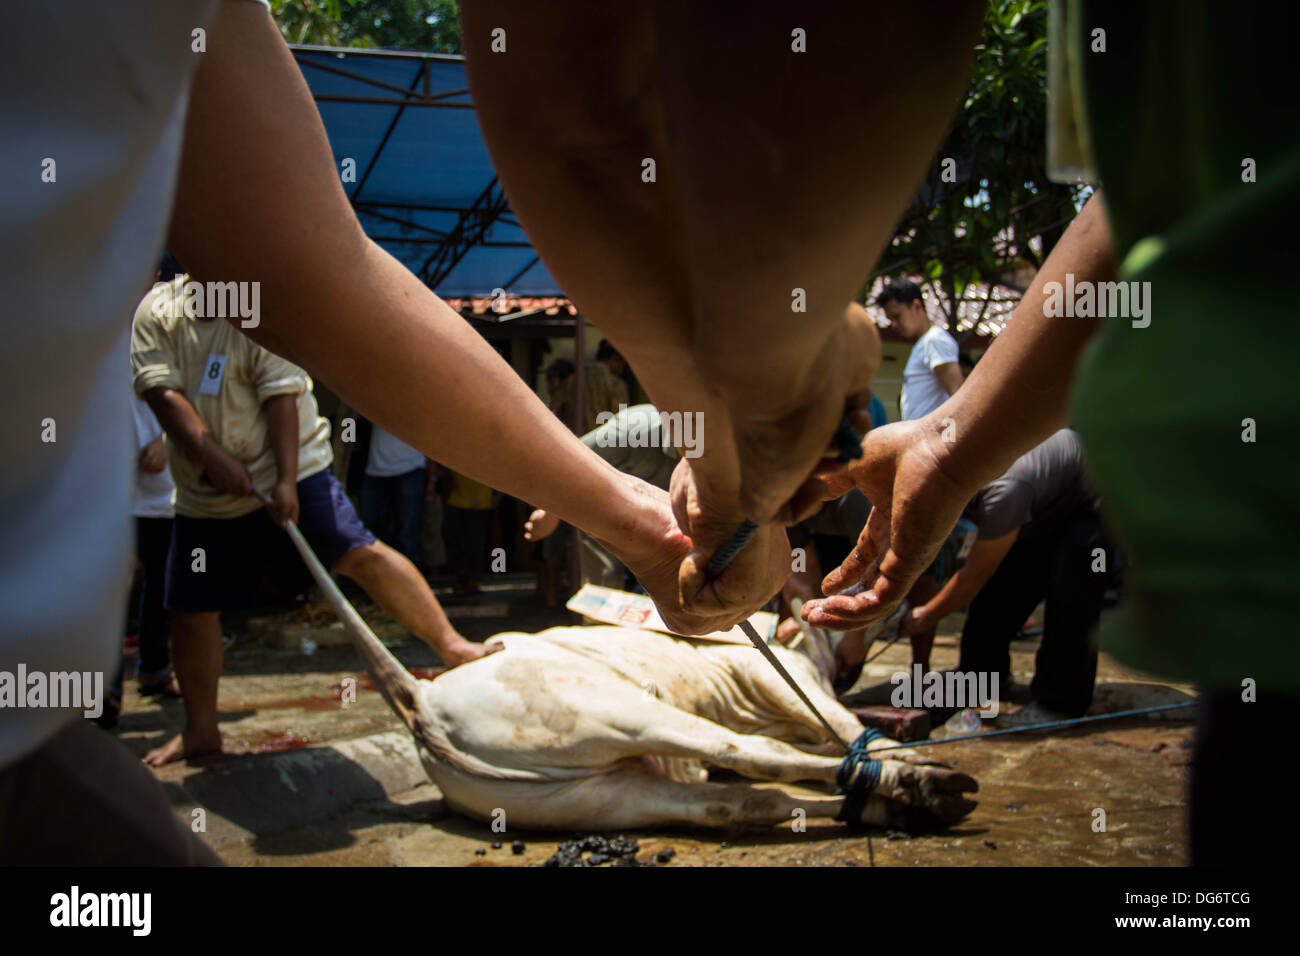 Serpong-Banten, Indonesia. 15th October 2013. A cow was roped tight before slaughtered. Muslims in Indonesia celebrate Iedul Adha by slaughtering cows or sheep to give to the poor.  Credit:  Donal Husni/Alamy Live News Stock Photo